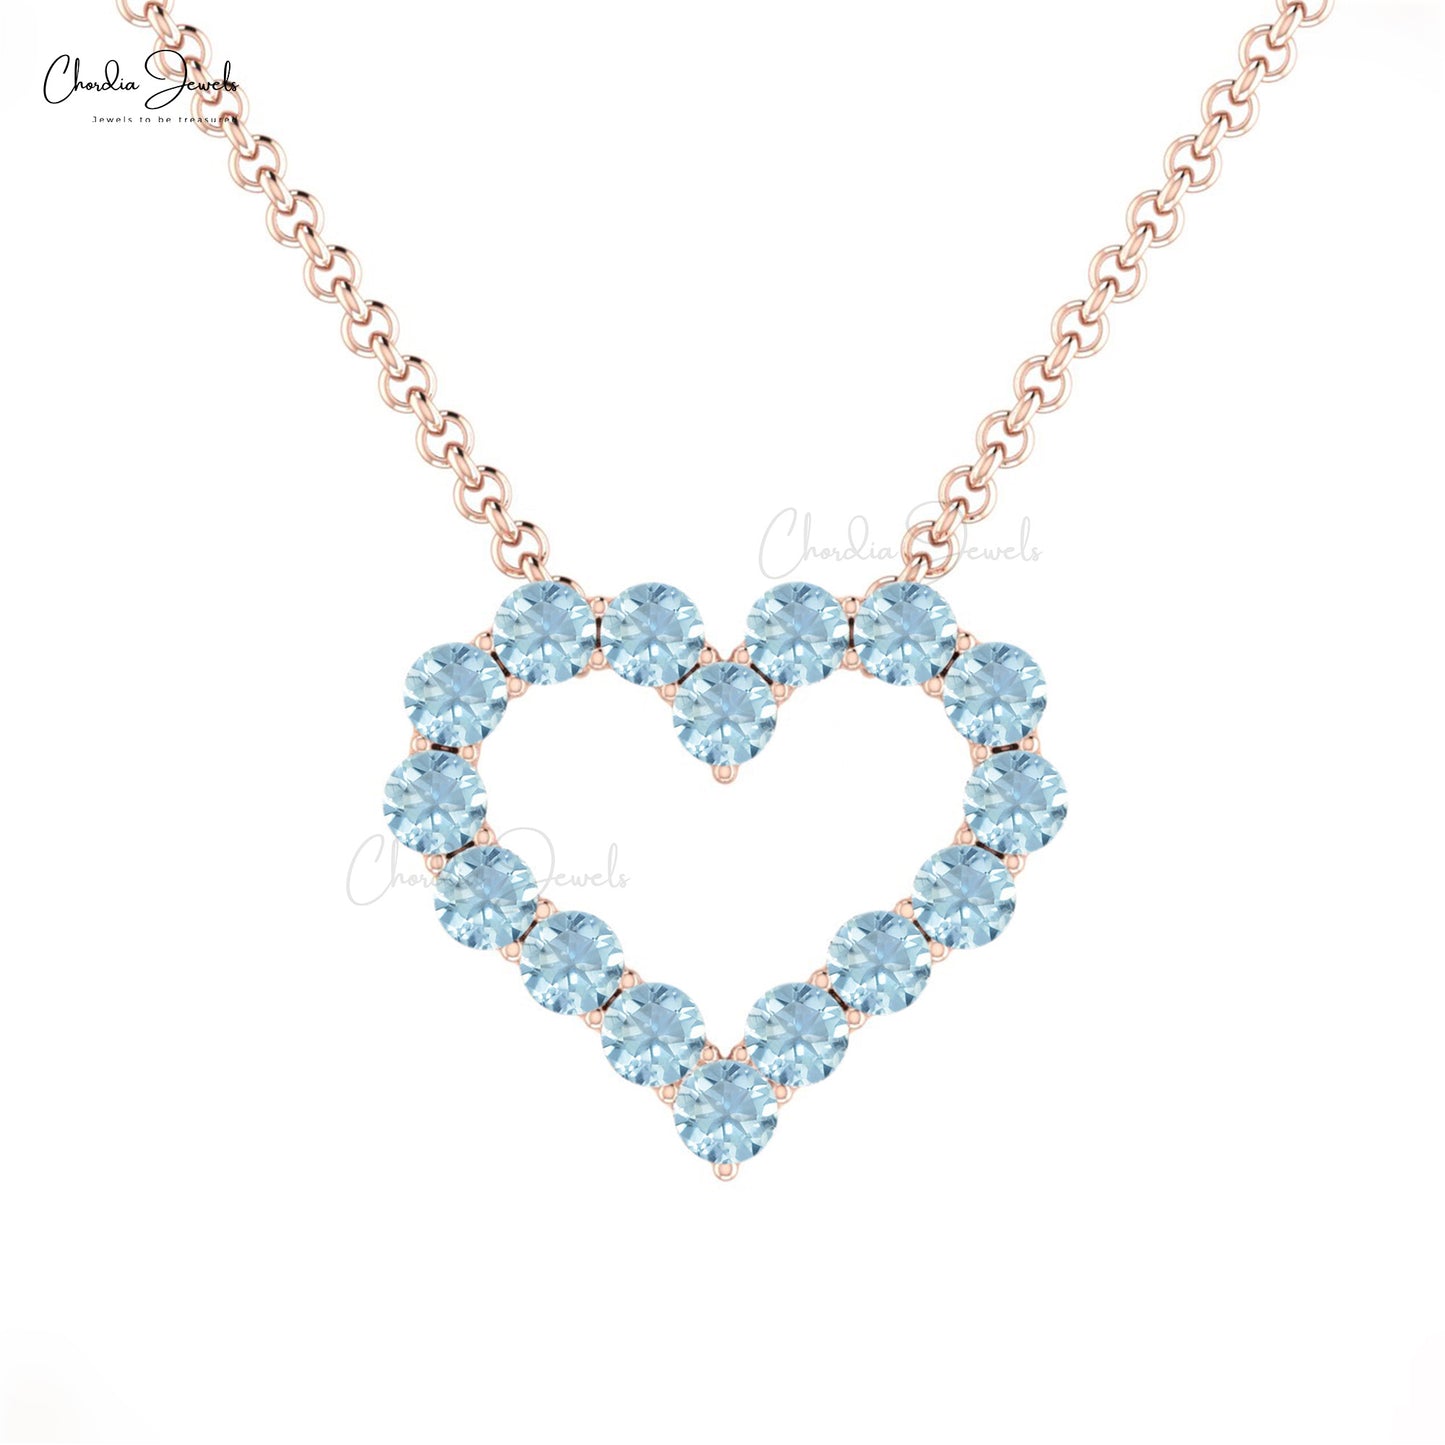 Classical Design Open Heart Charms Necklace Pendant Genuine Aquamarine Round Gemstone Necklace in 14k Solid Gold Gift For Her